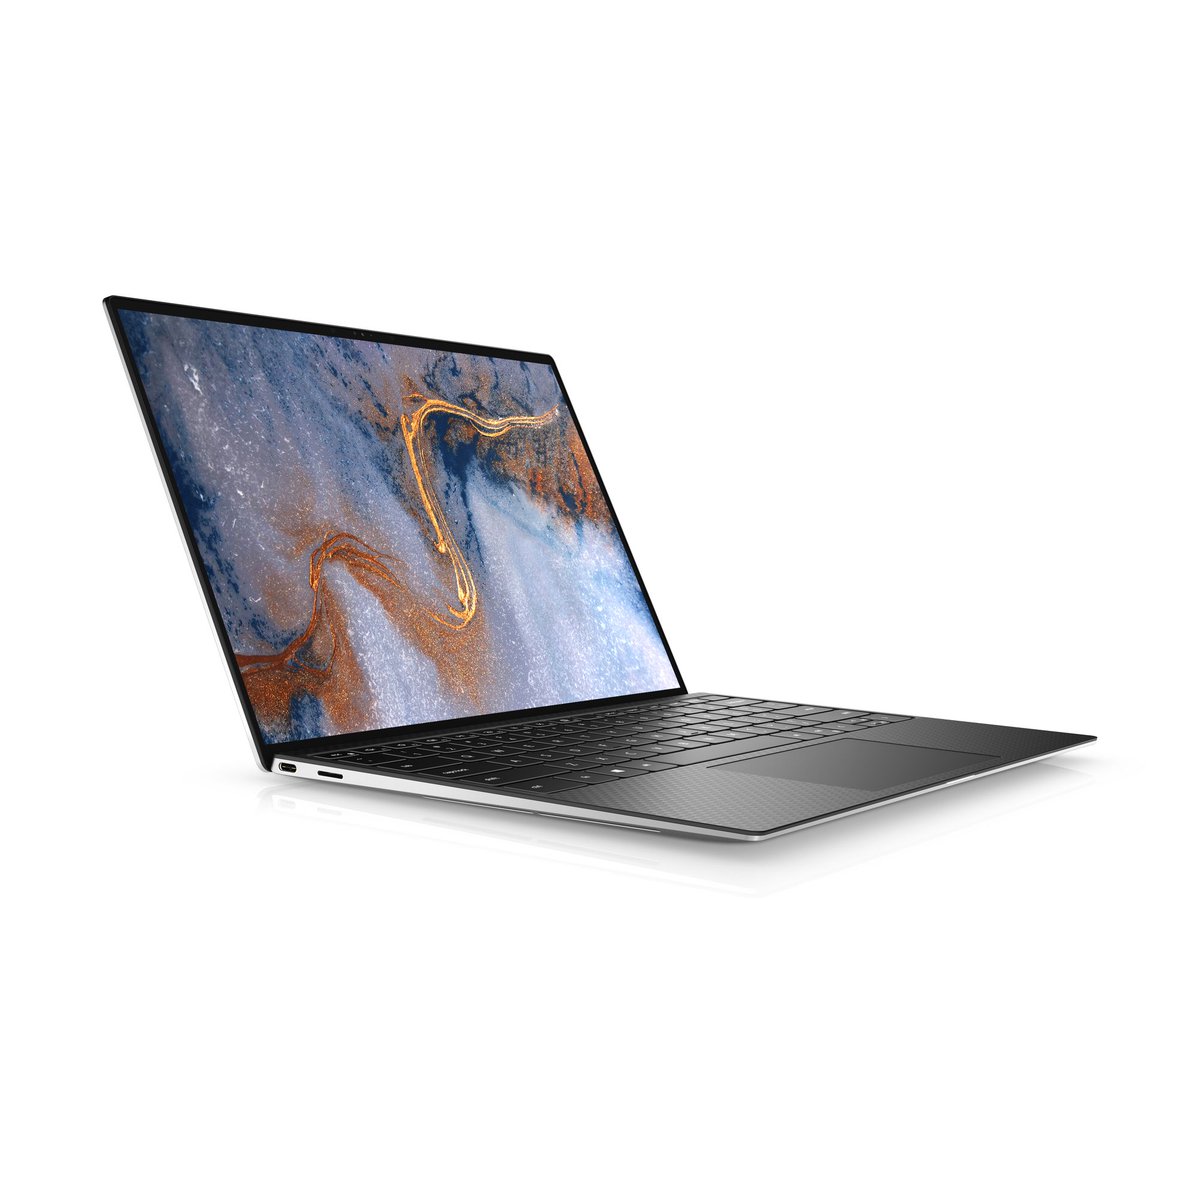 Dell’s XPS 13 now comes with an OLED touch display option